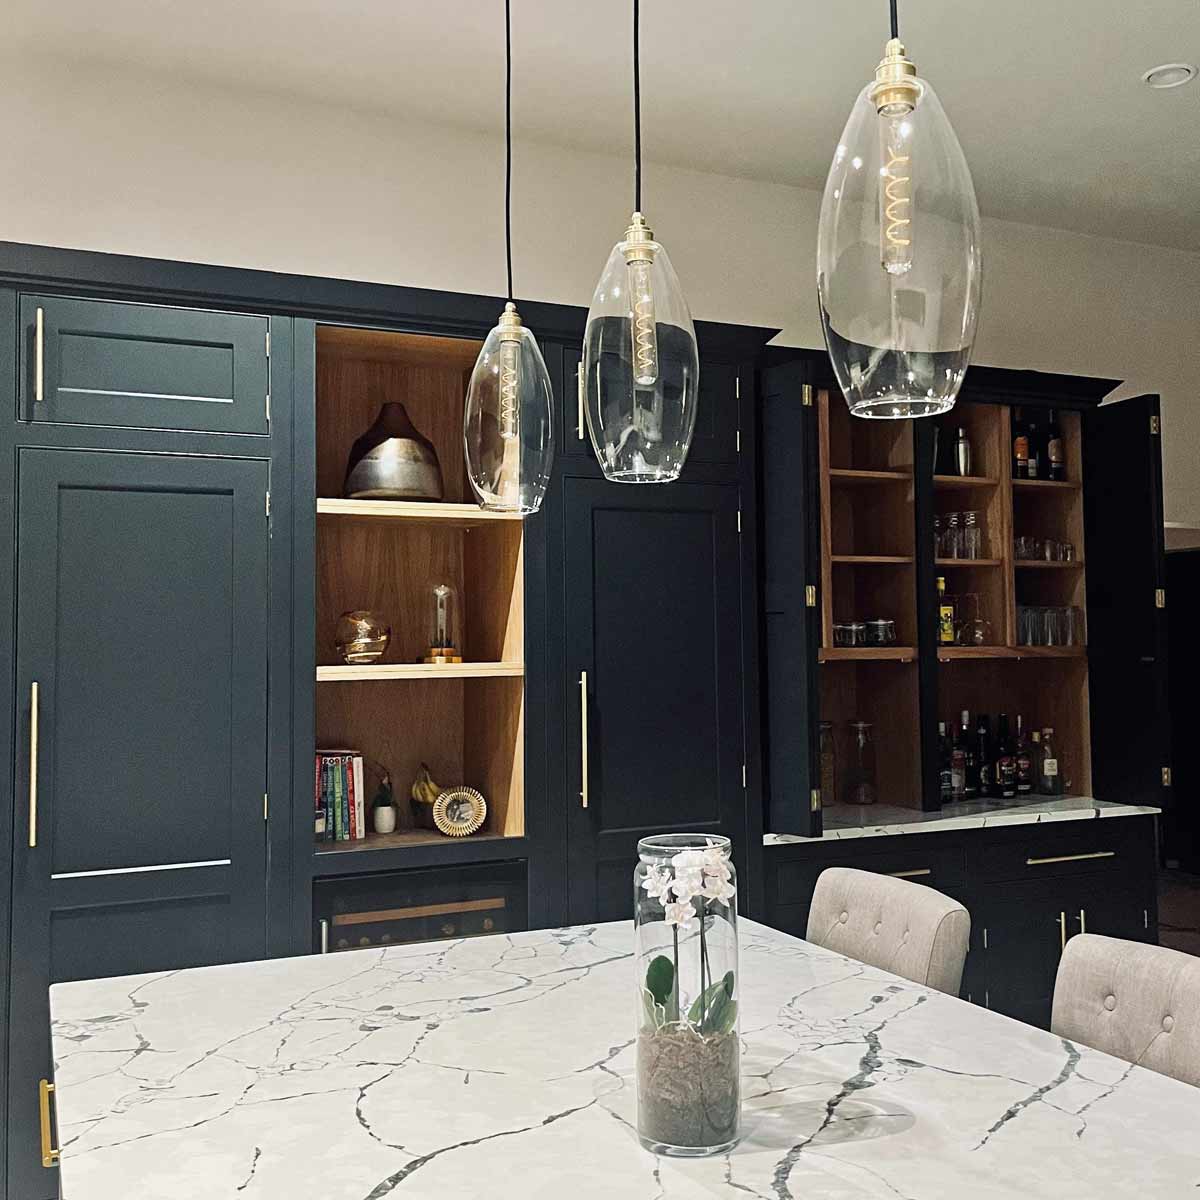 Kitchen glass pendants made by Leverint and sold by South Charlotte Fine Lighting in the UK